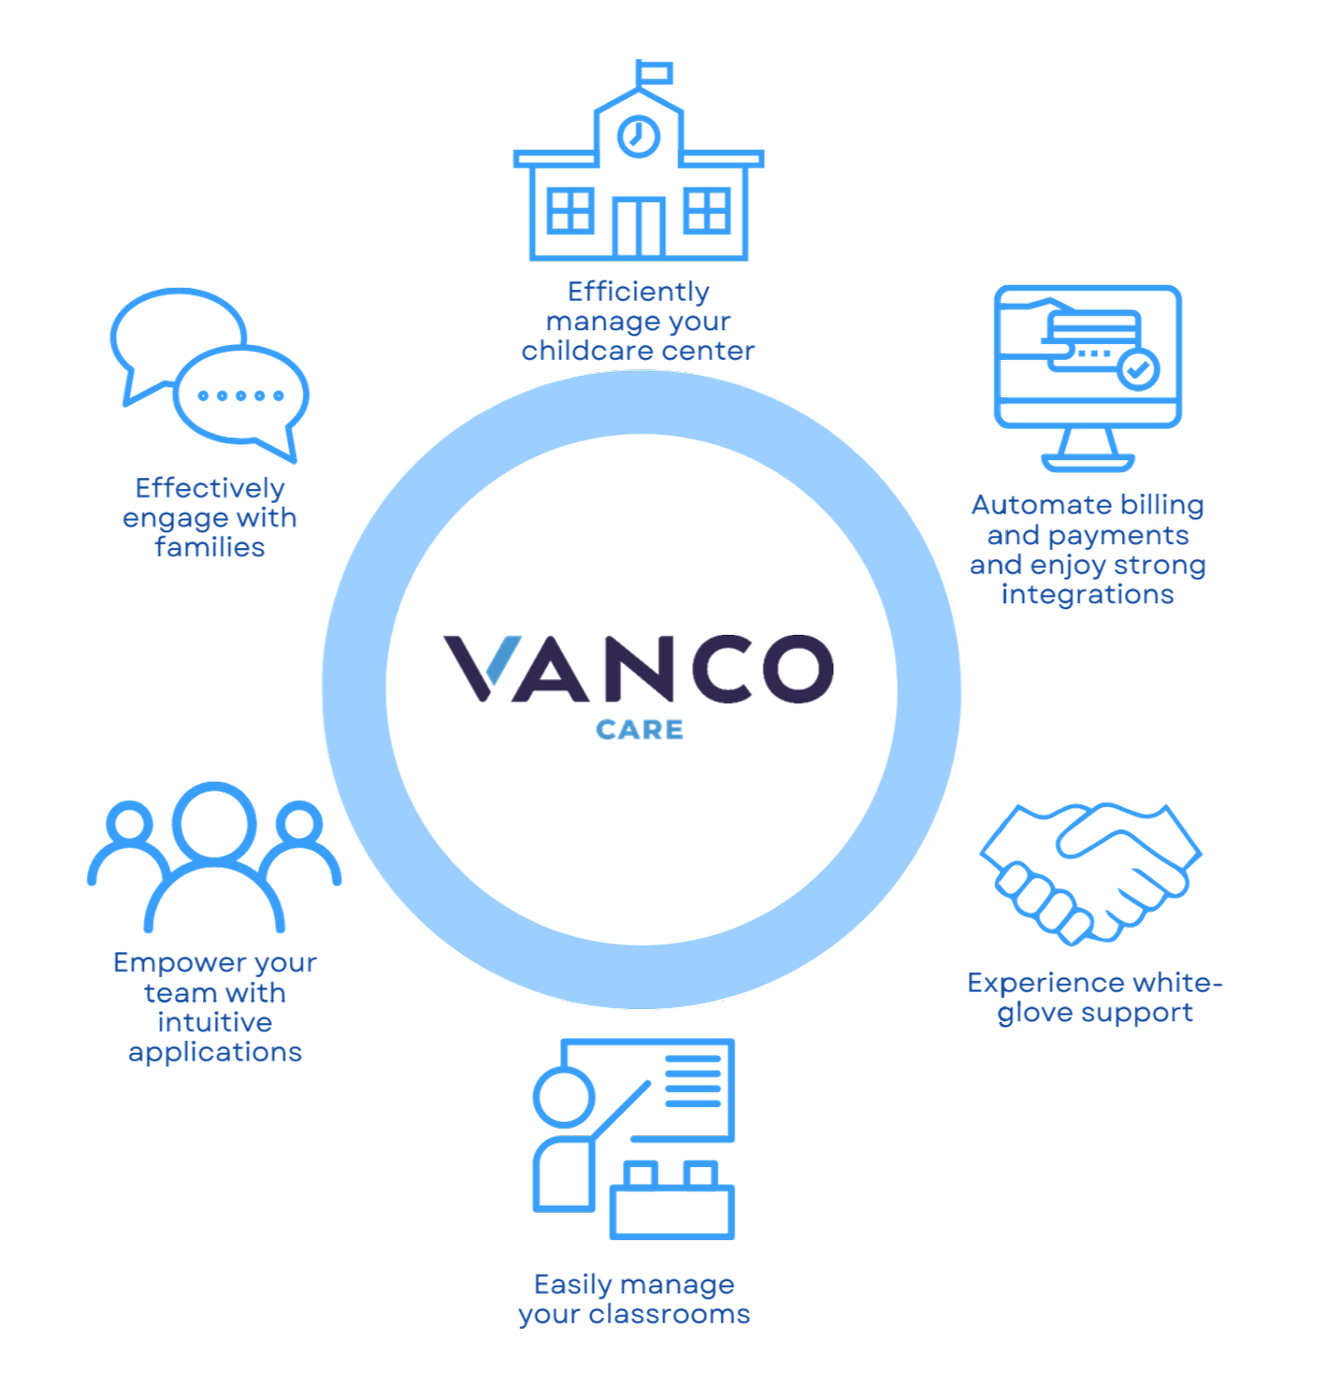 Vanco Care Smartcare Features and Benefits